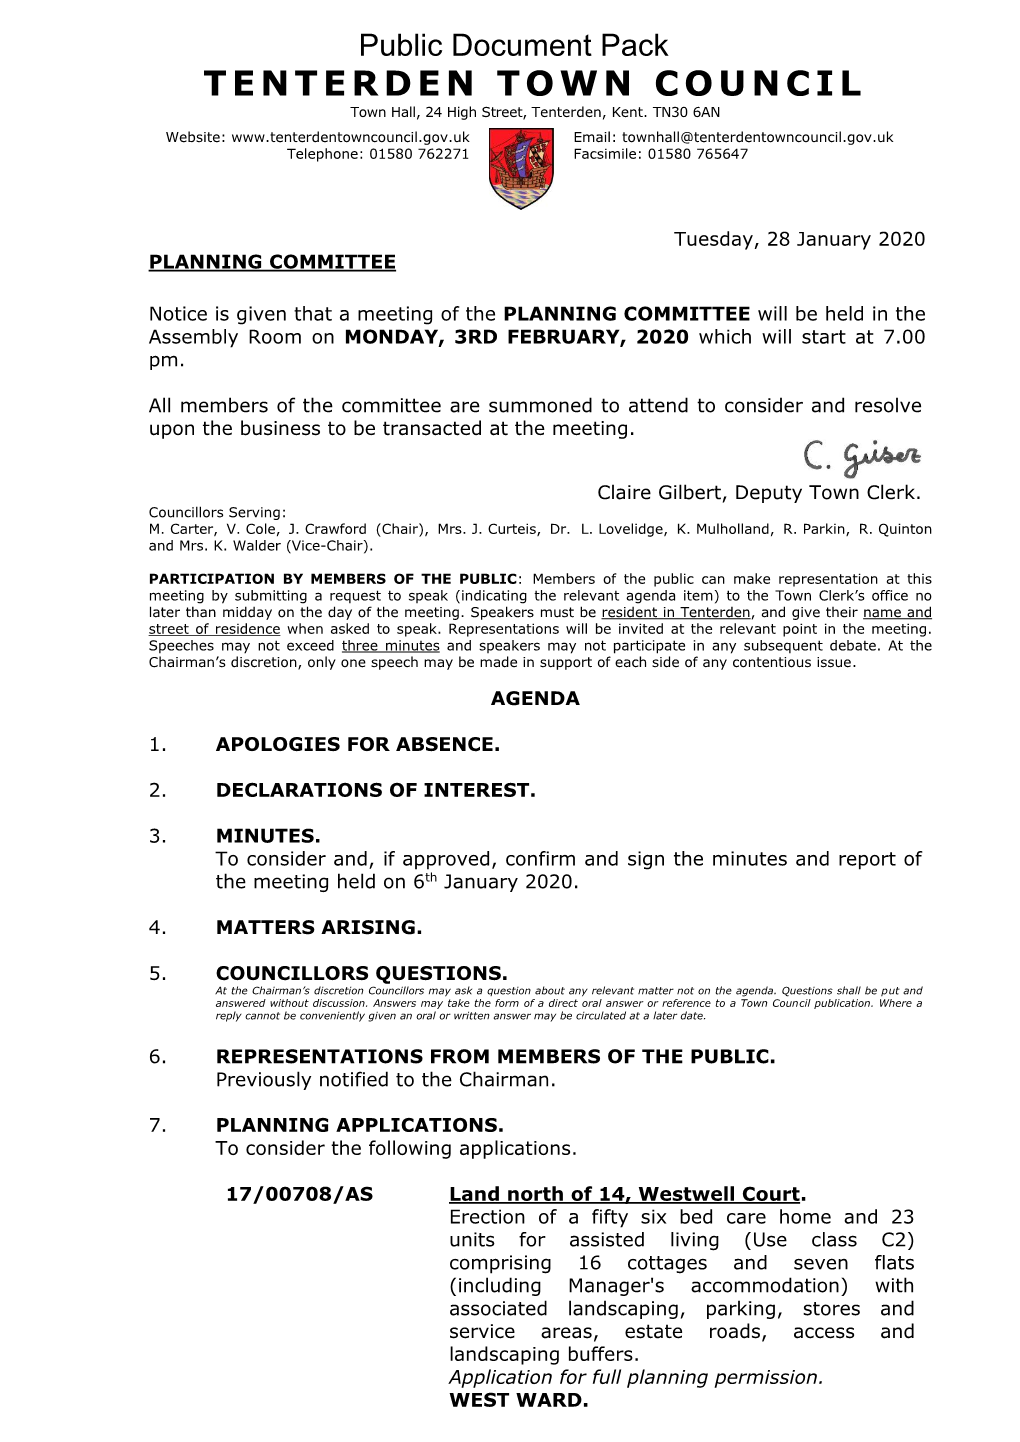 (Public Pack)Agenda Document for Planning Committee, 03/02/2020